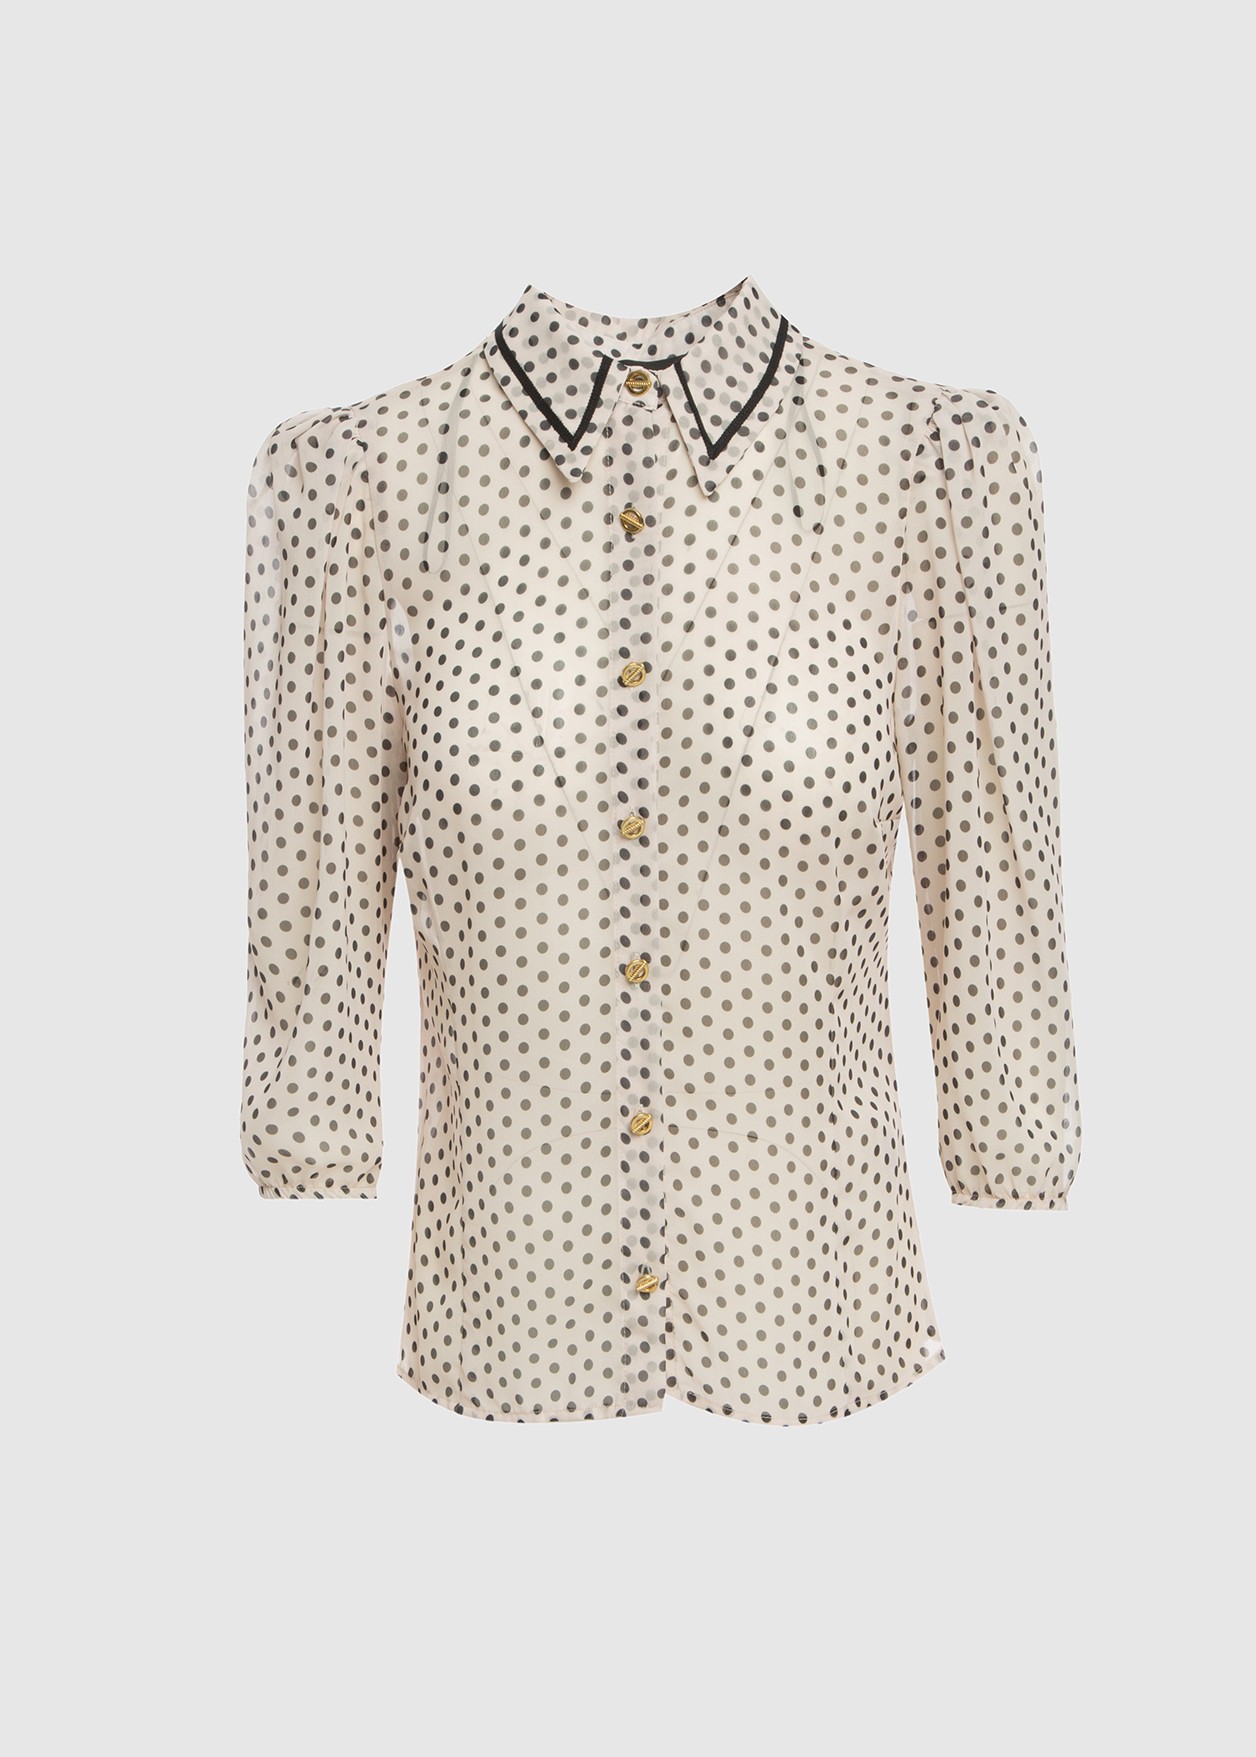 Dotted shirt with gold buttons